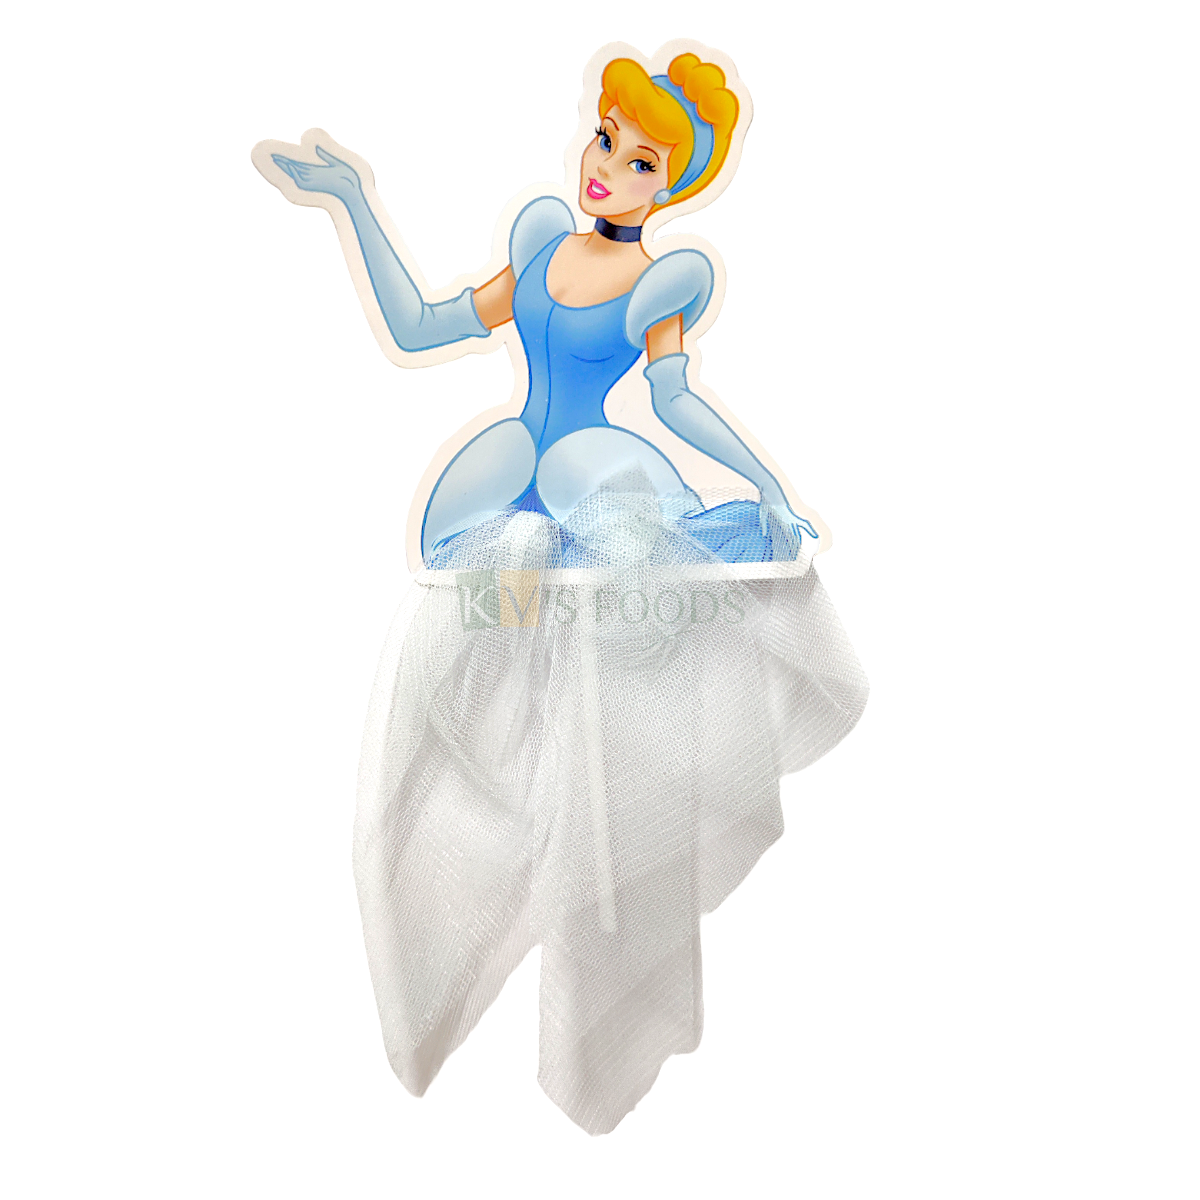 1 PC Blue Princess Cinderella Disney Net Skirt Girl Lady Women Paper Cake Topper for Bride Wedding, Mother's Day, Women's Day Theme, Pull Me Up Doll Cakes Daughters Birthday Party DIY Cake Decorations